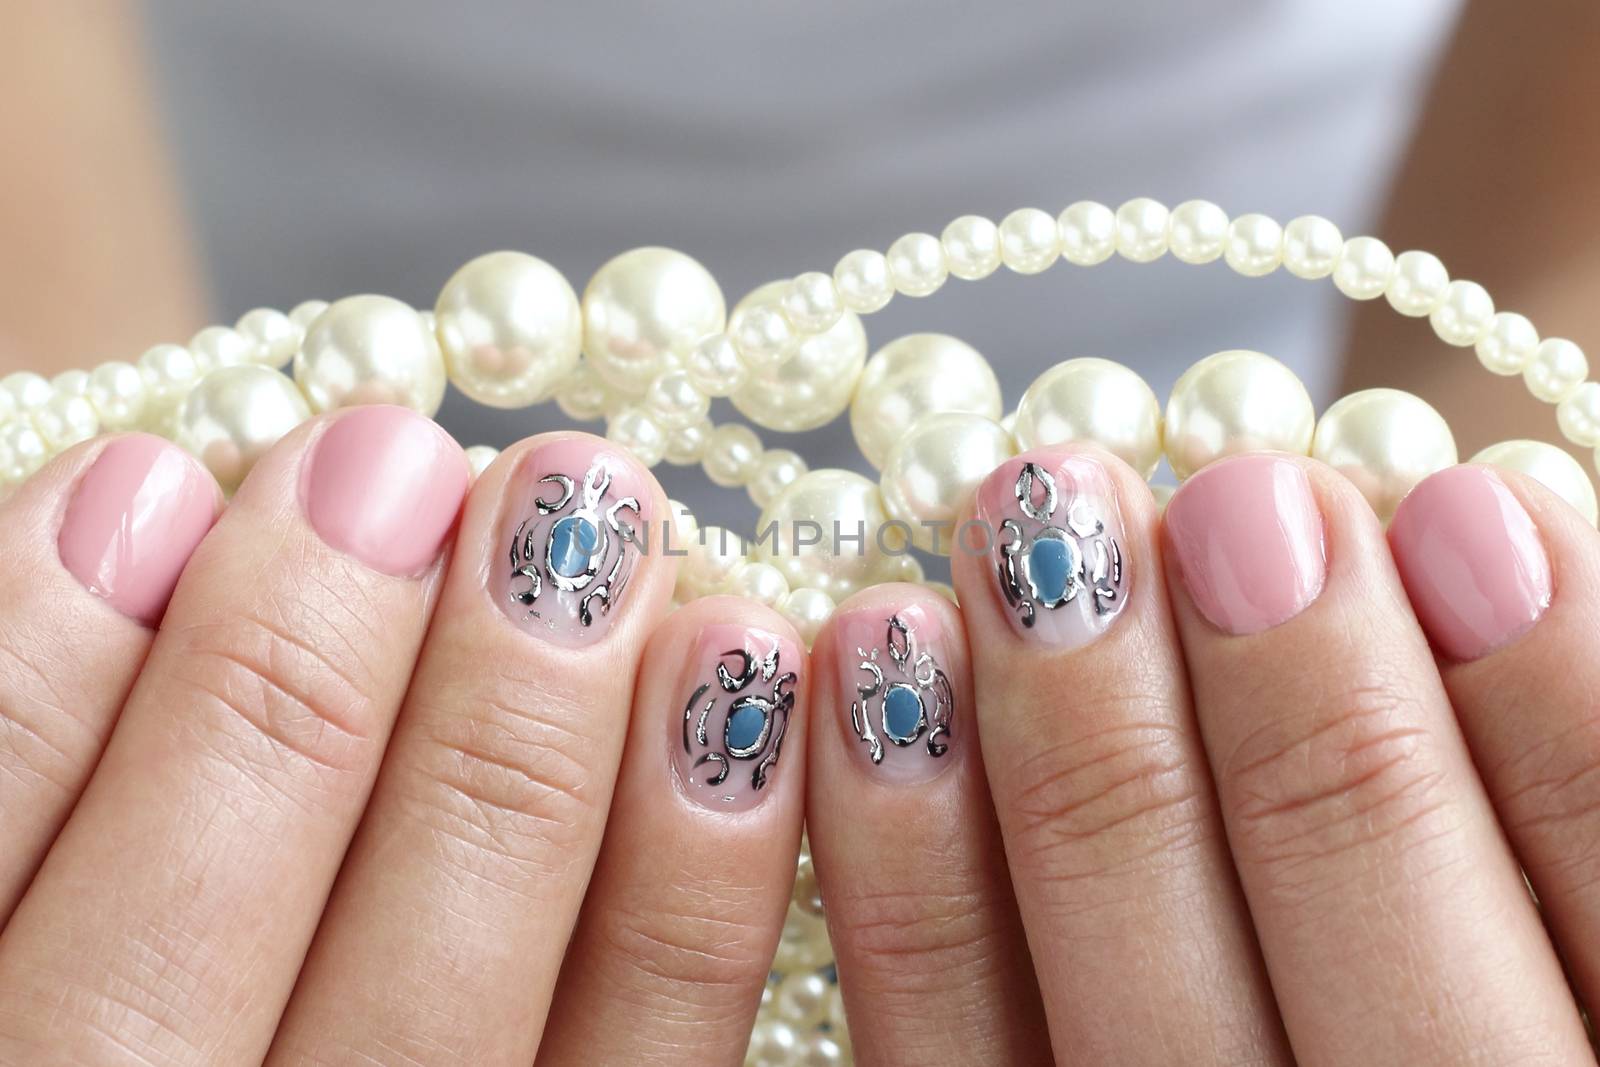 Beautiful nails with art by openas